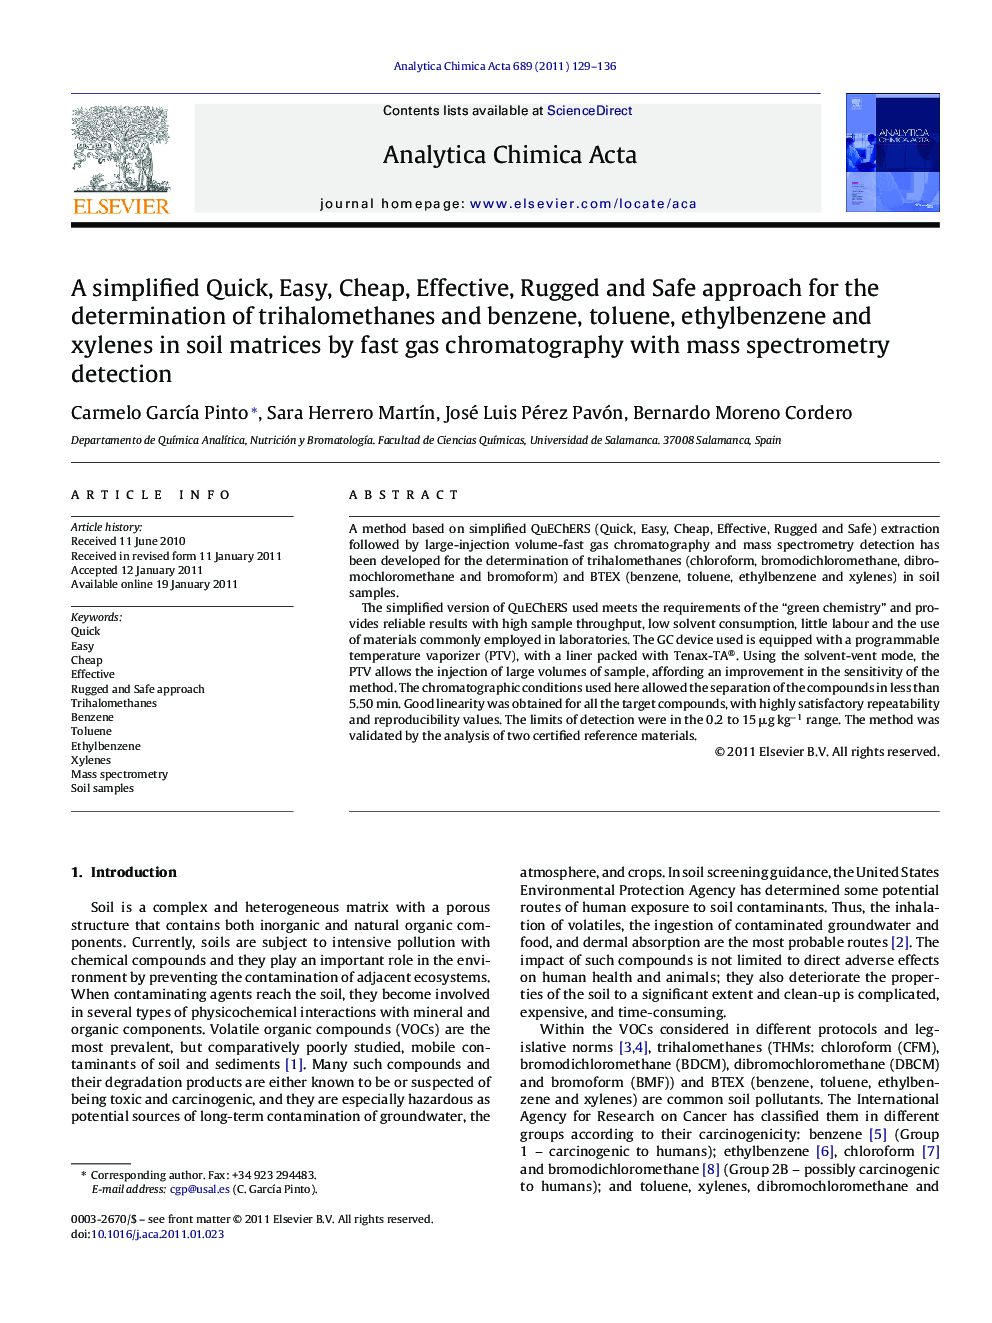 A simplified Quick, Easy, Cheap, Effective, Rugged and Safe approach for the determination of trihalomethanes and benzene, toluene, ethylbenzene and xylenes in soil matrices by fast gas chromatography with mass spectrometry detection